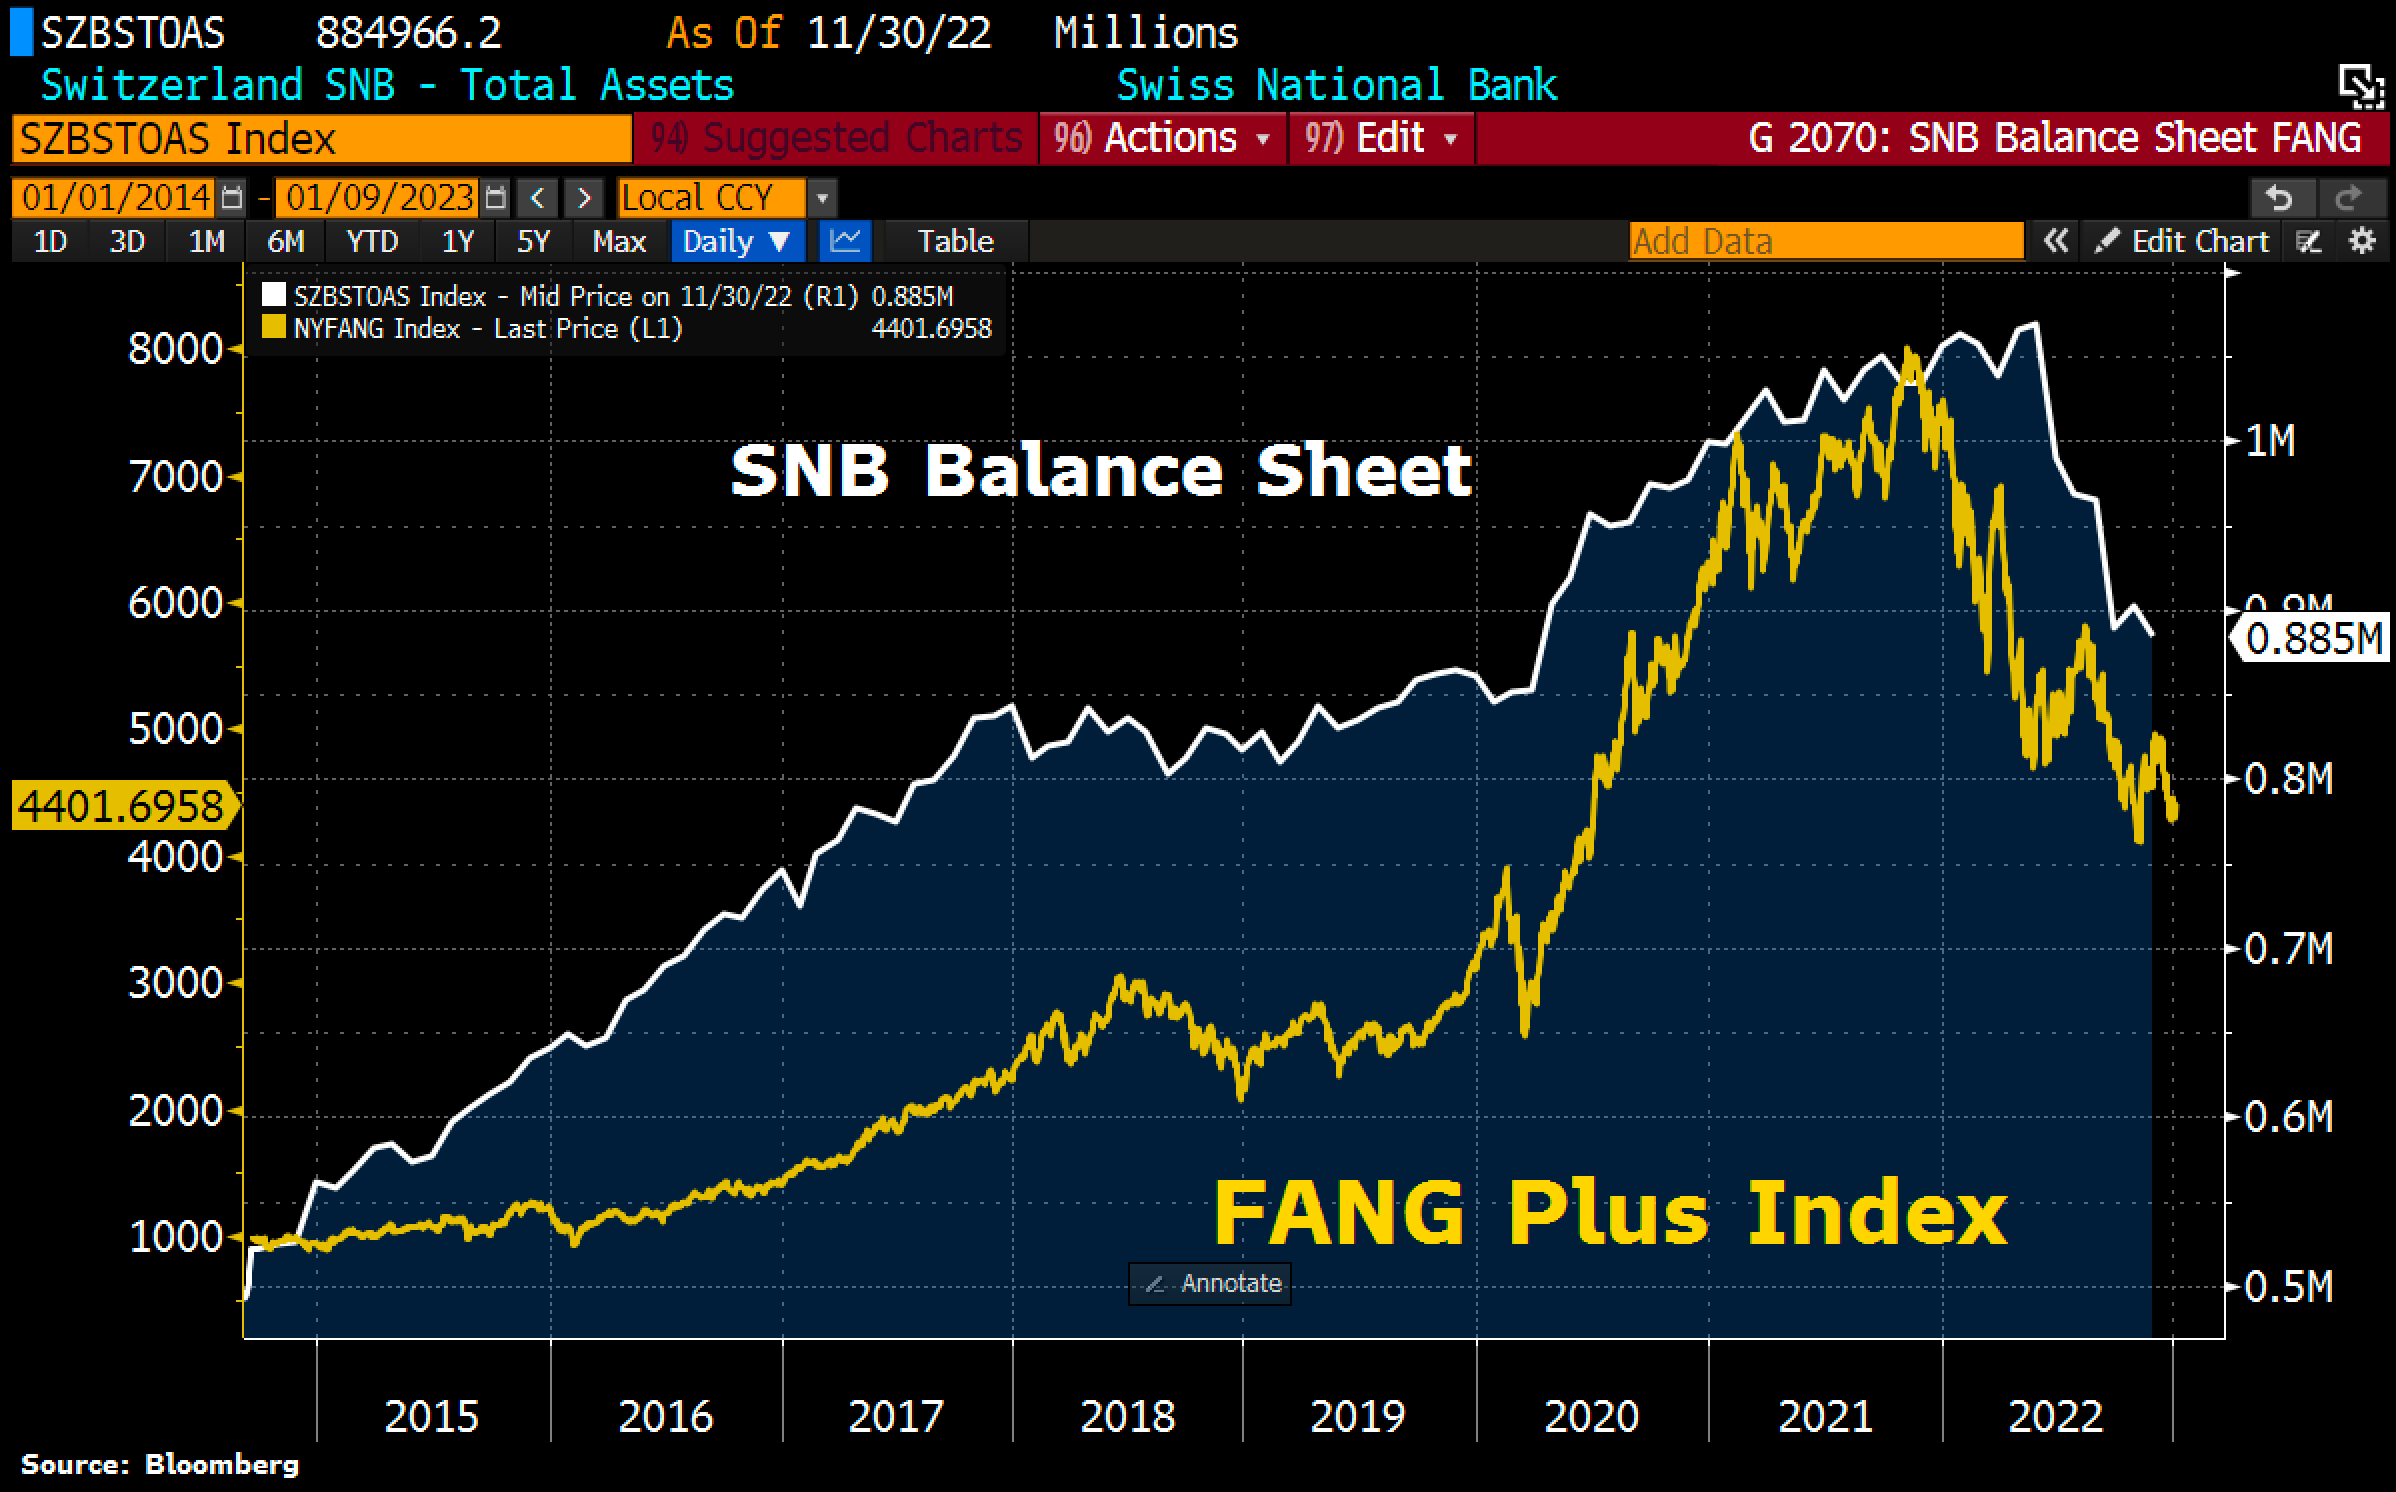 Swiss National Bank balance sheet trades in tandem w/FANG Plus Index